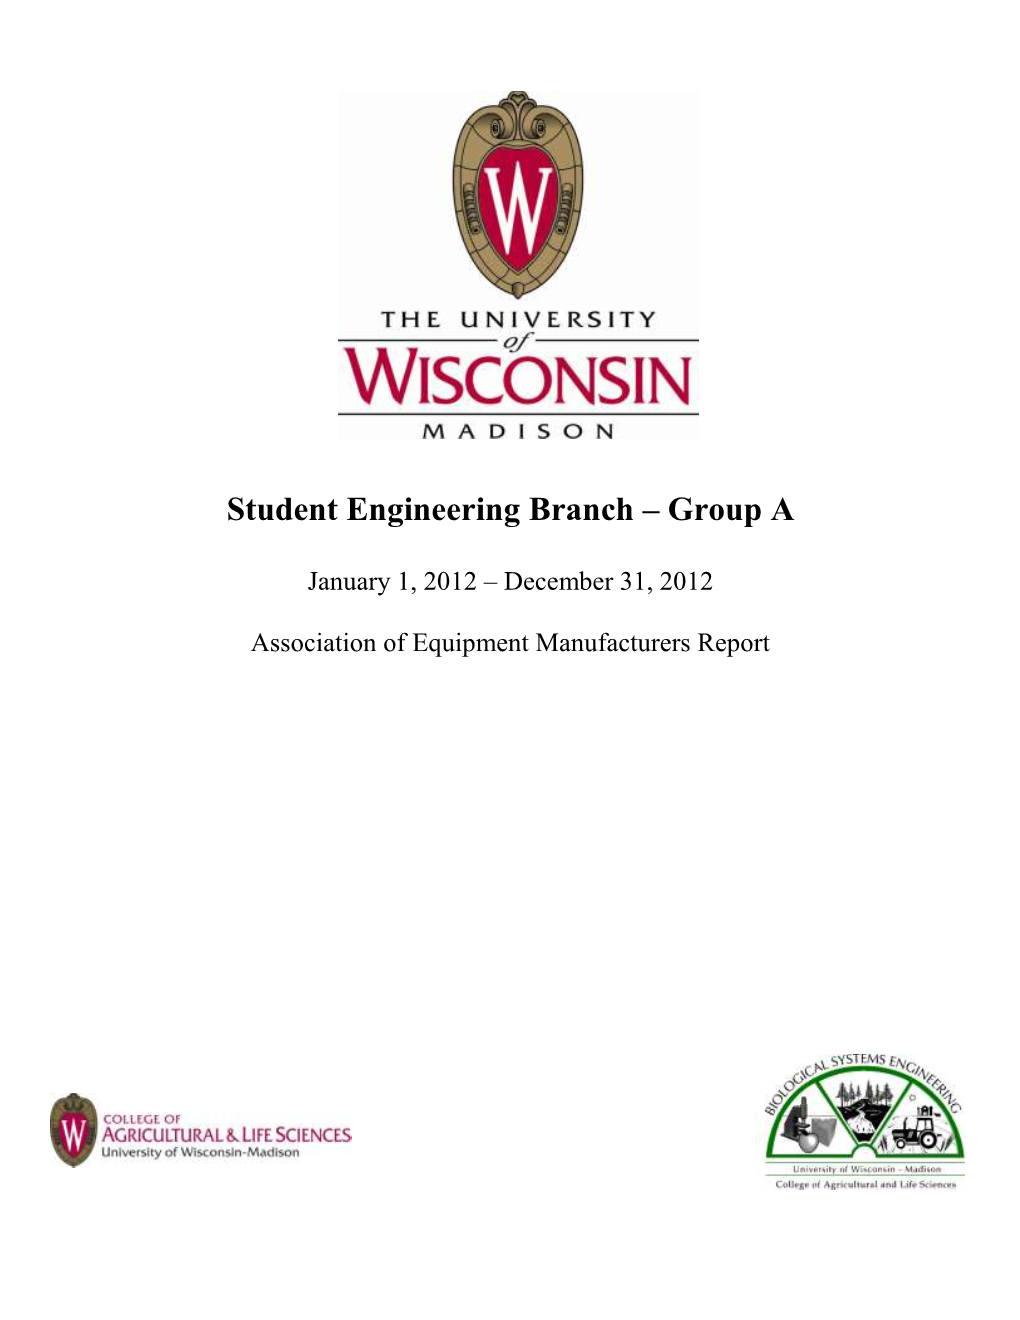 Student Engineering Branch – Group a A. Organization